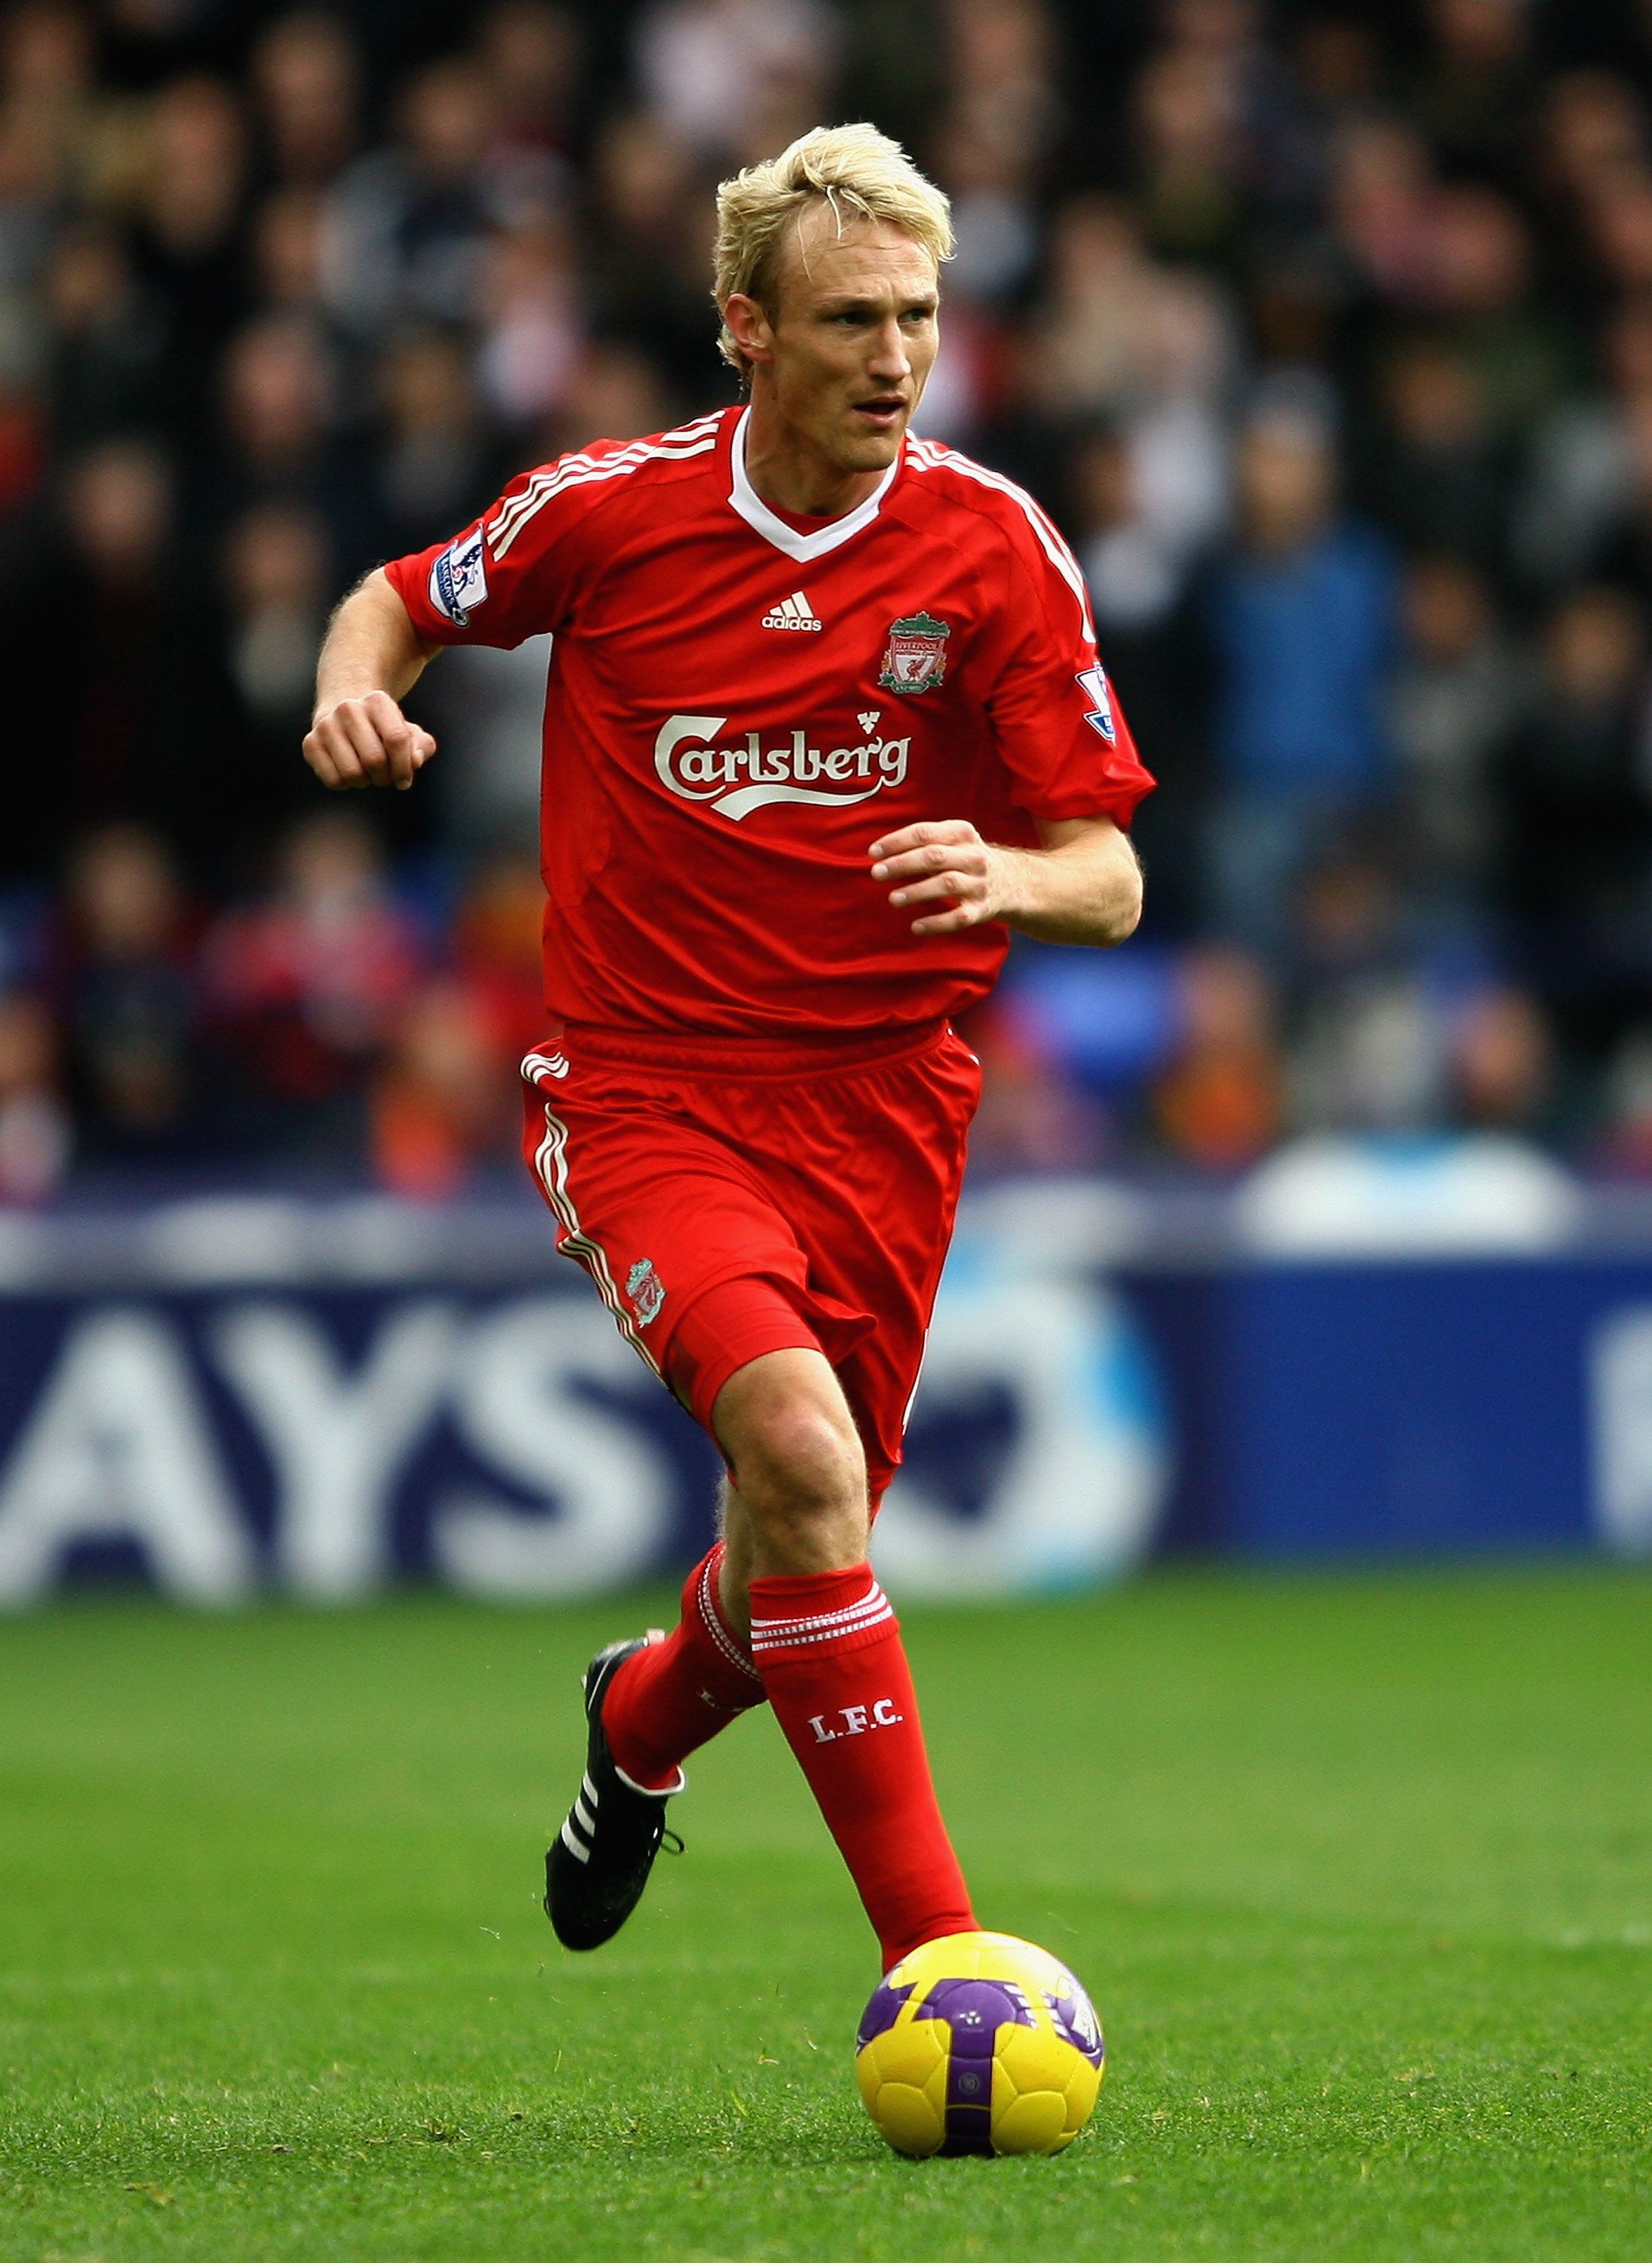 BOLTON, UNITED KINGDOM - NOVEMBER 15:  Sami Hyypia of Liverpool in action during the Barclays Premier League match between Bolton Wanderers and Liverpool at The Reebok Stadium on November 15, 2008 in Bolton, England.  (Photo by Clive Brunskill/Getty Image